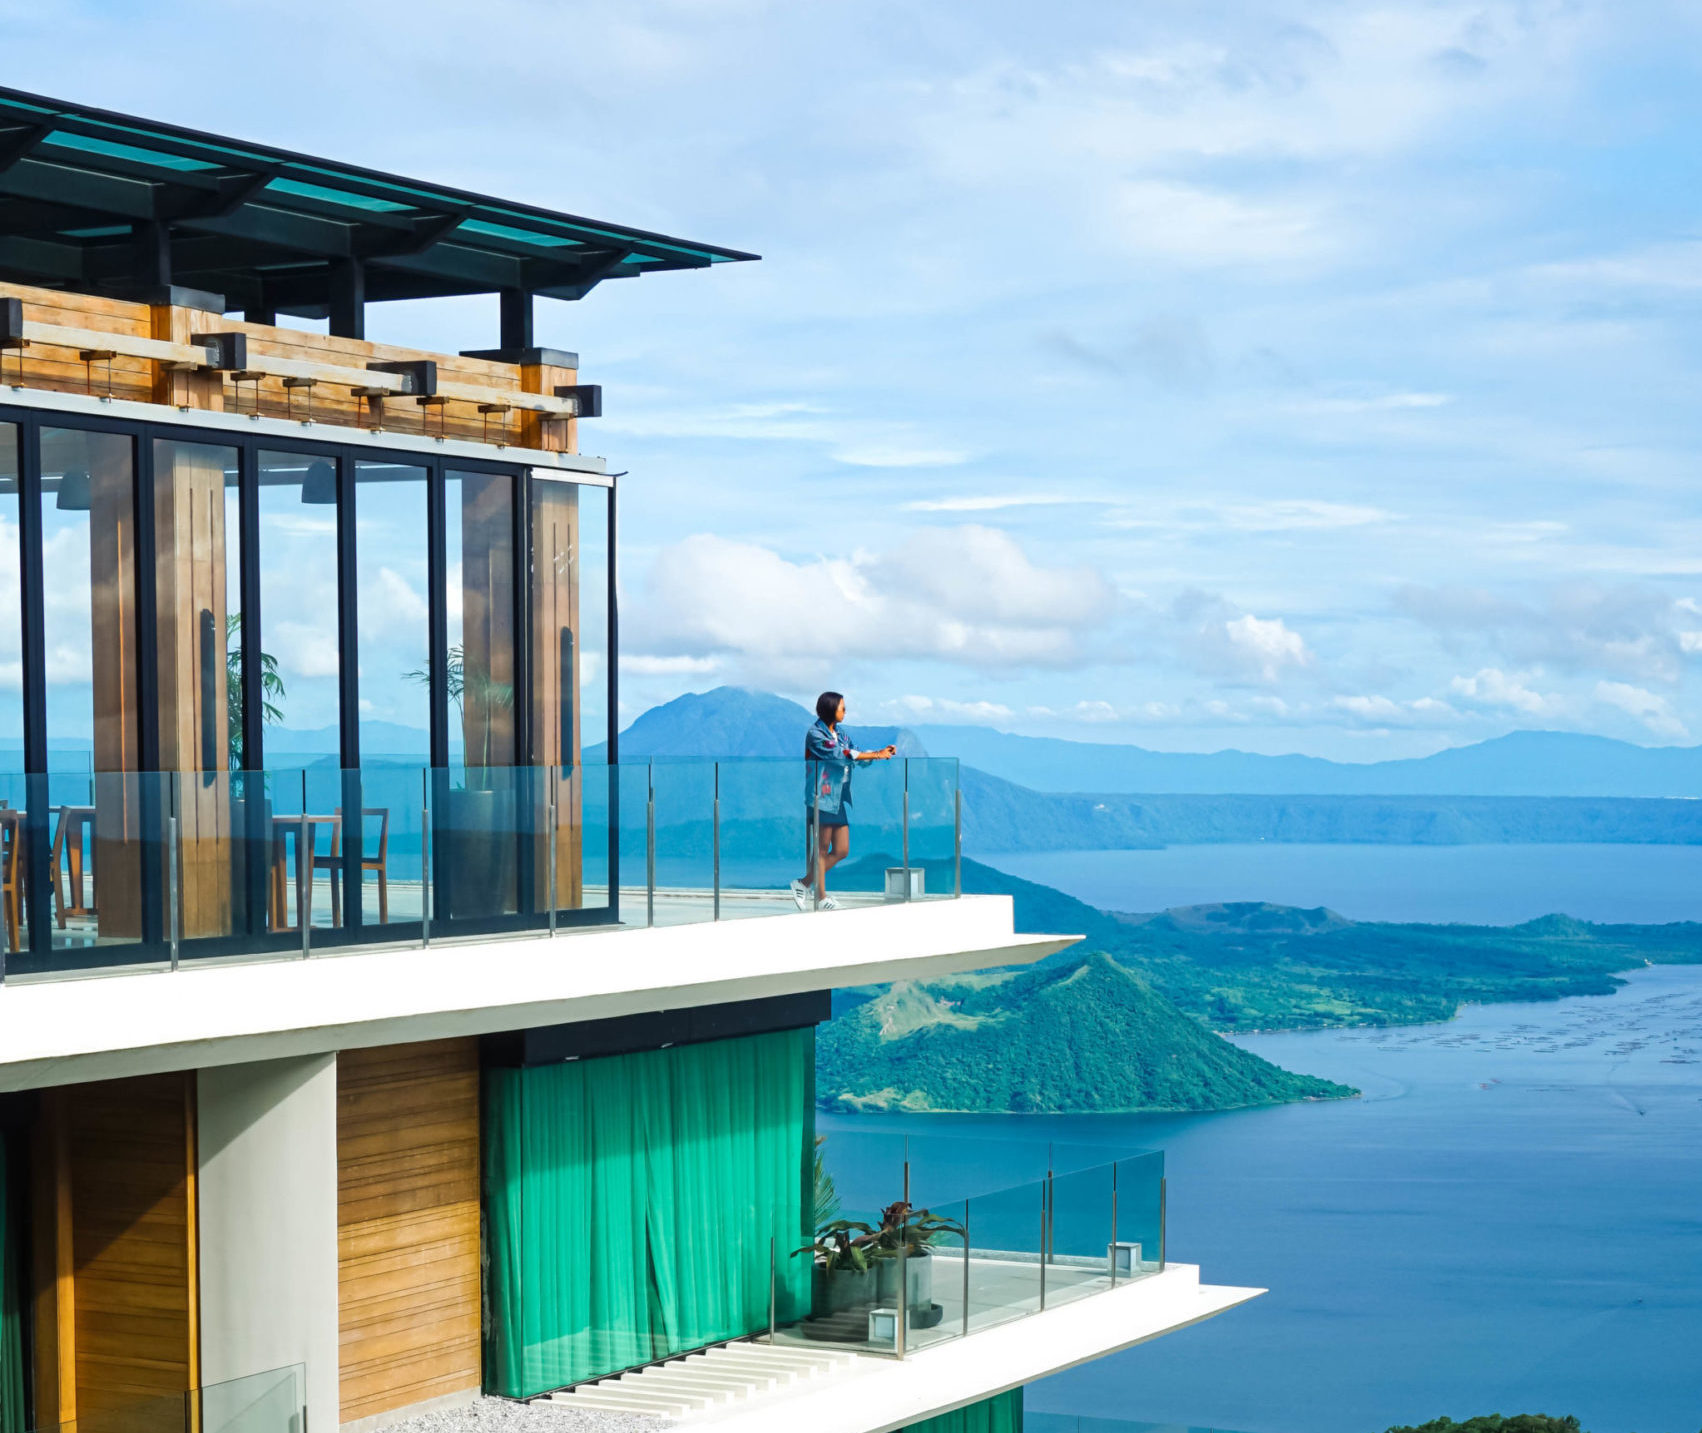 Escala hotel with a view of Taal volcano in Tagaytay, Philippines